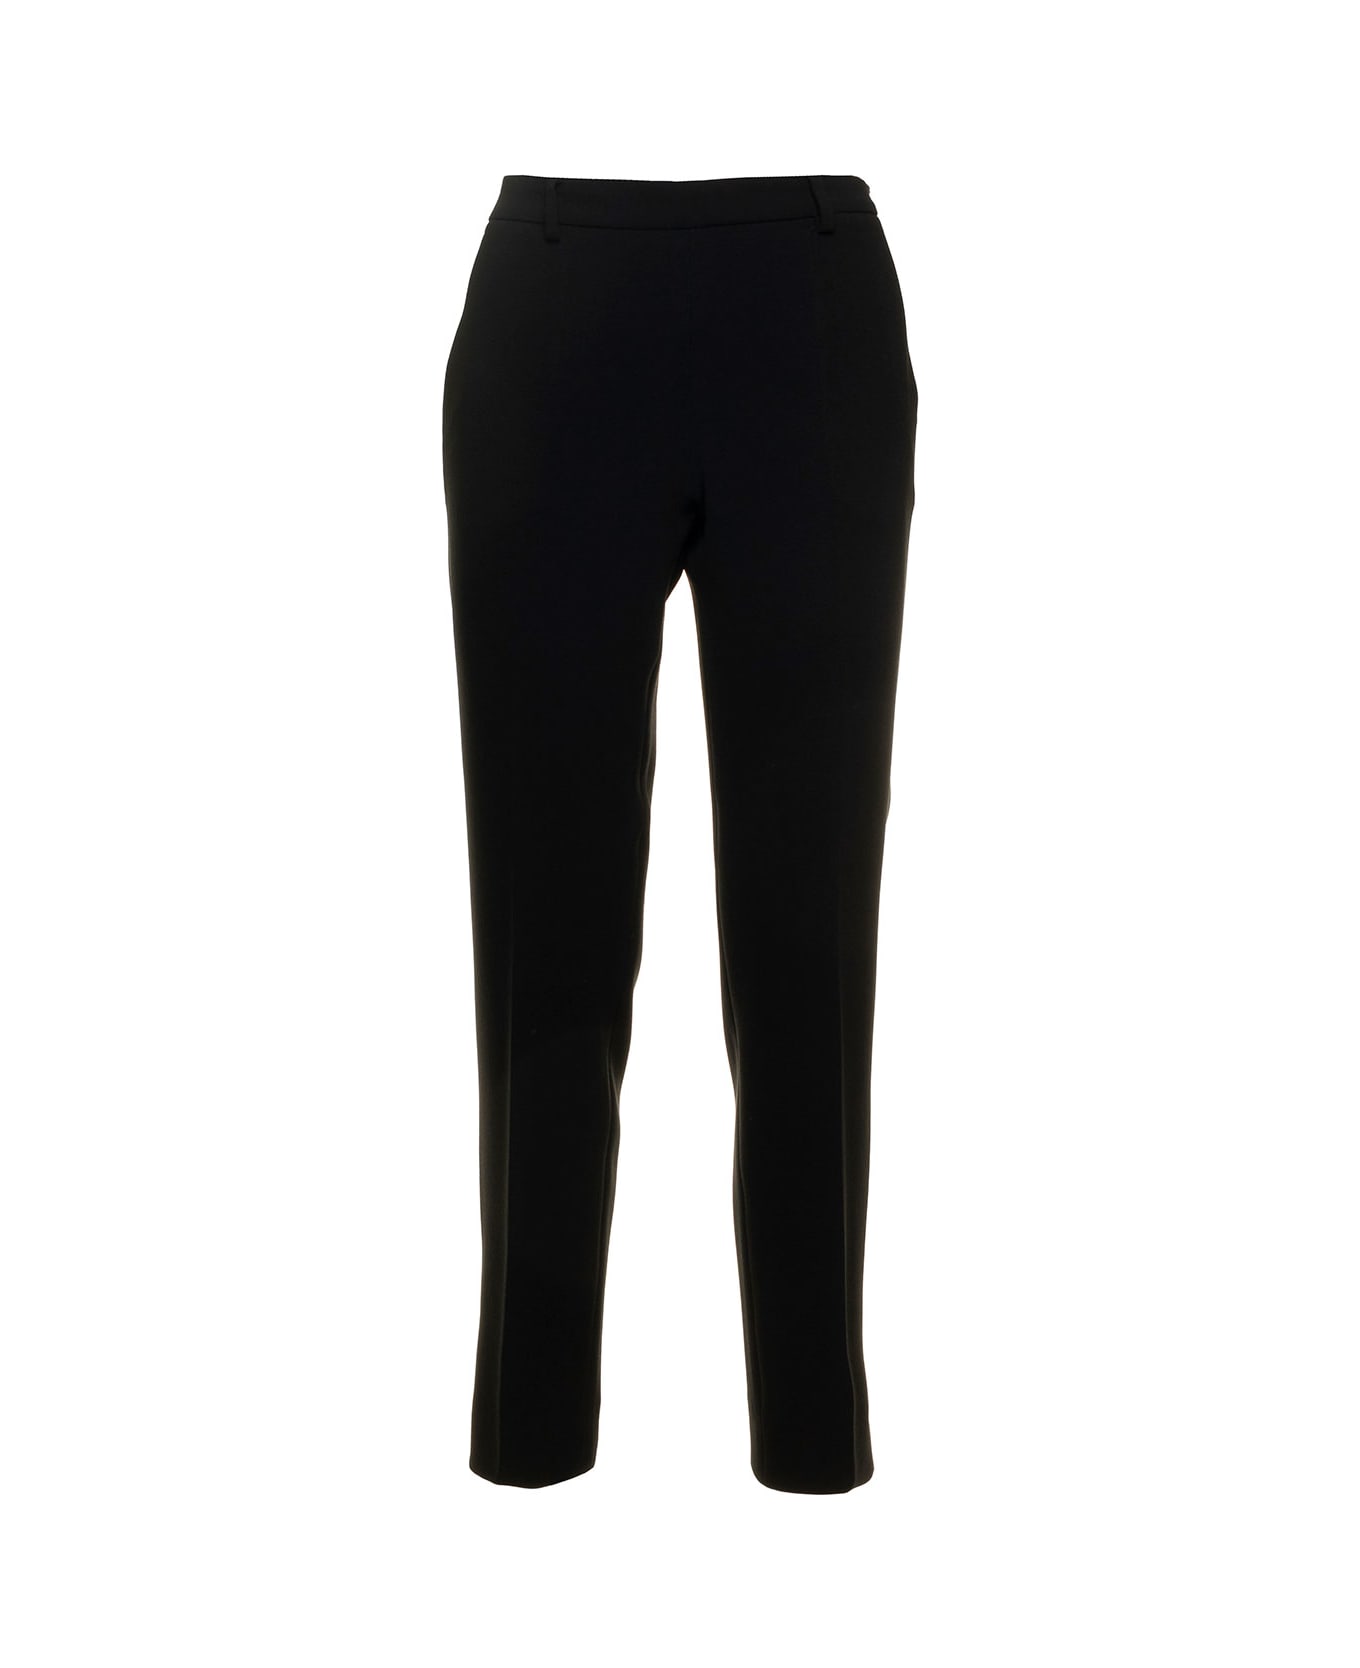 Alberto Biani Black Pants With Side Pockets In Stretch Fabric Woman - Black